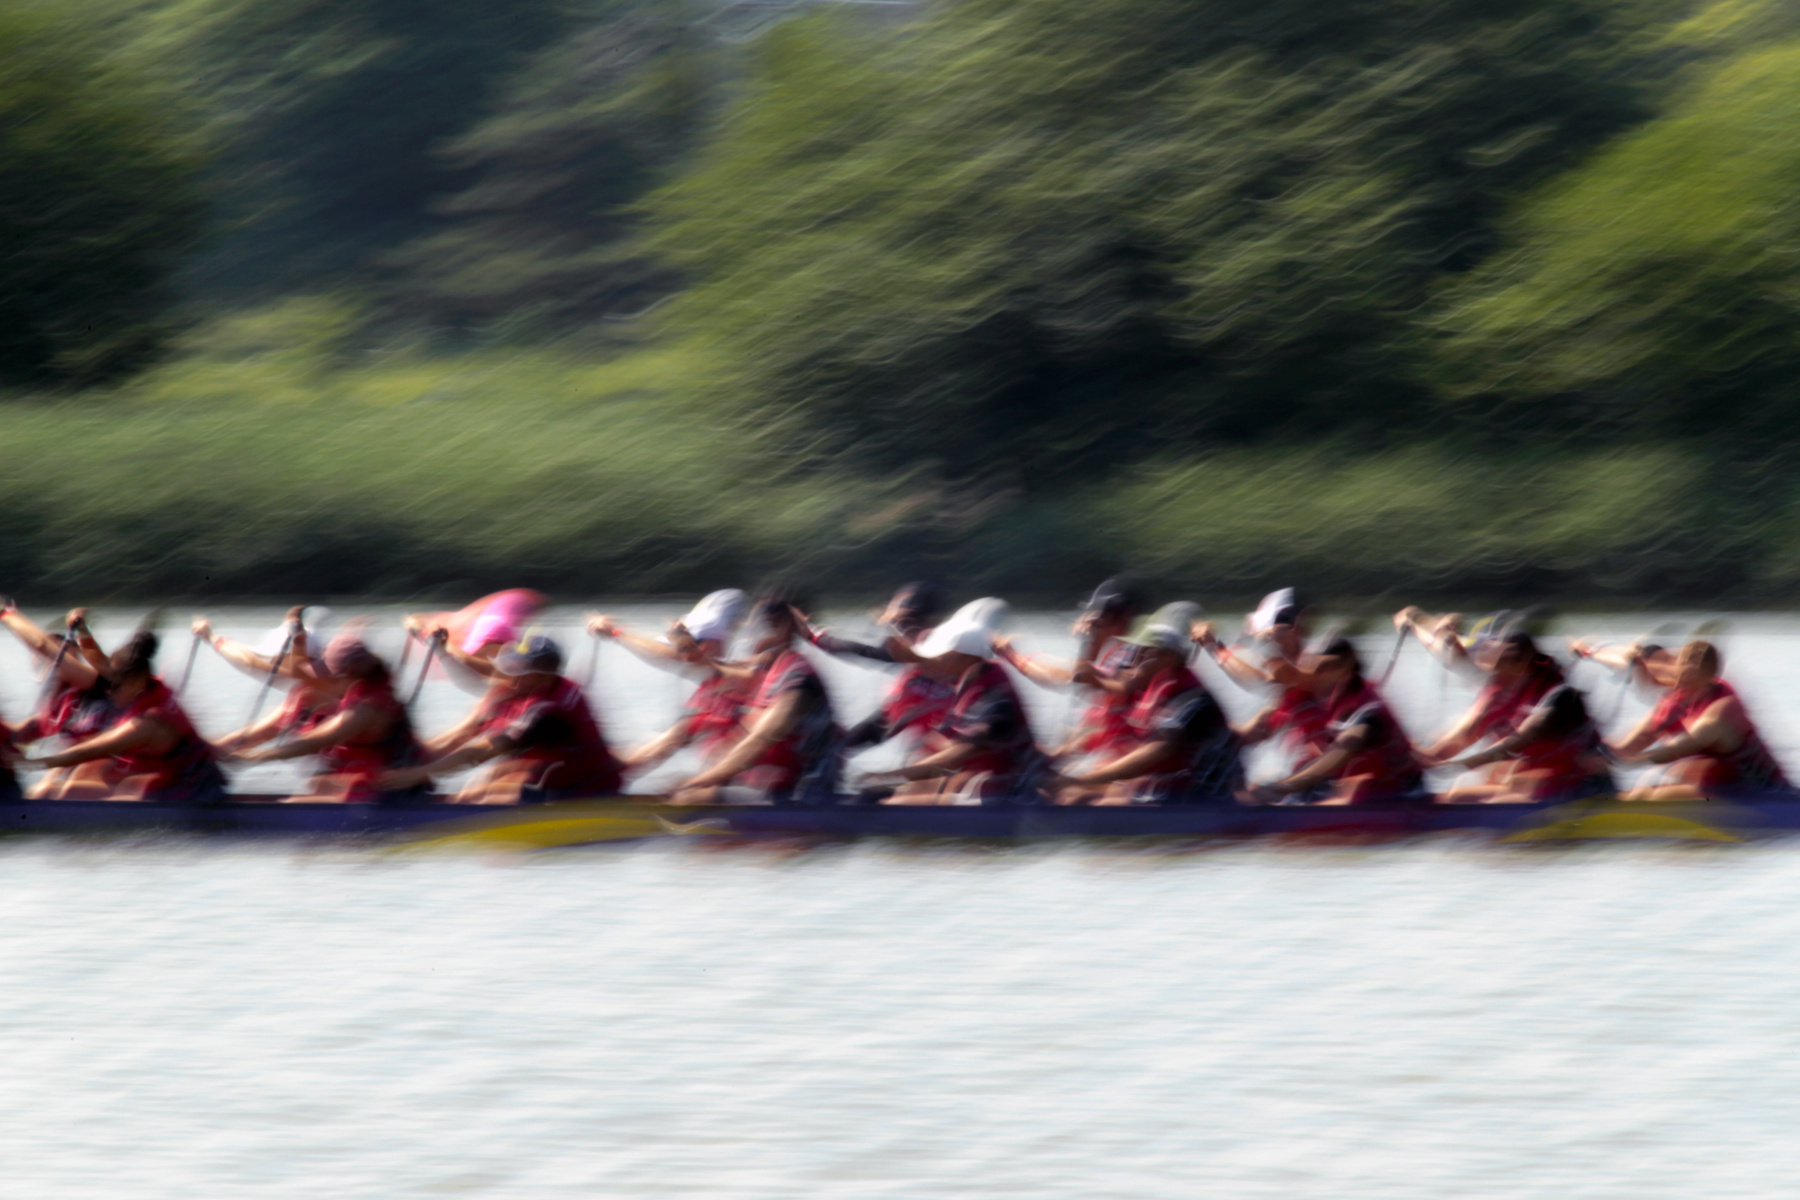 Dragon Boat Race, Corona-Flushing Meadow Park, Queens : Parks and People : Photography by Adam Stoltman: Sports Photography, The Arts, Portraiture, Travel, Photojournalism and Fine Art in New York